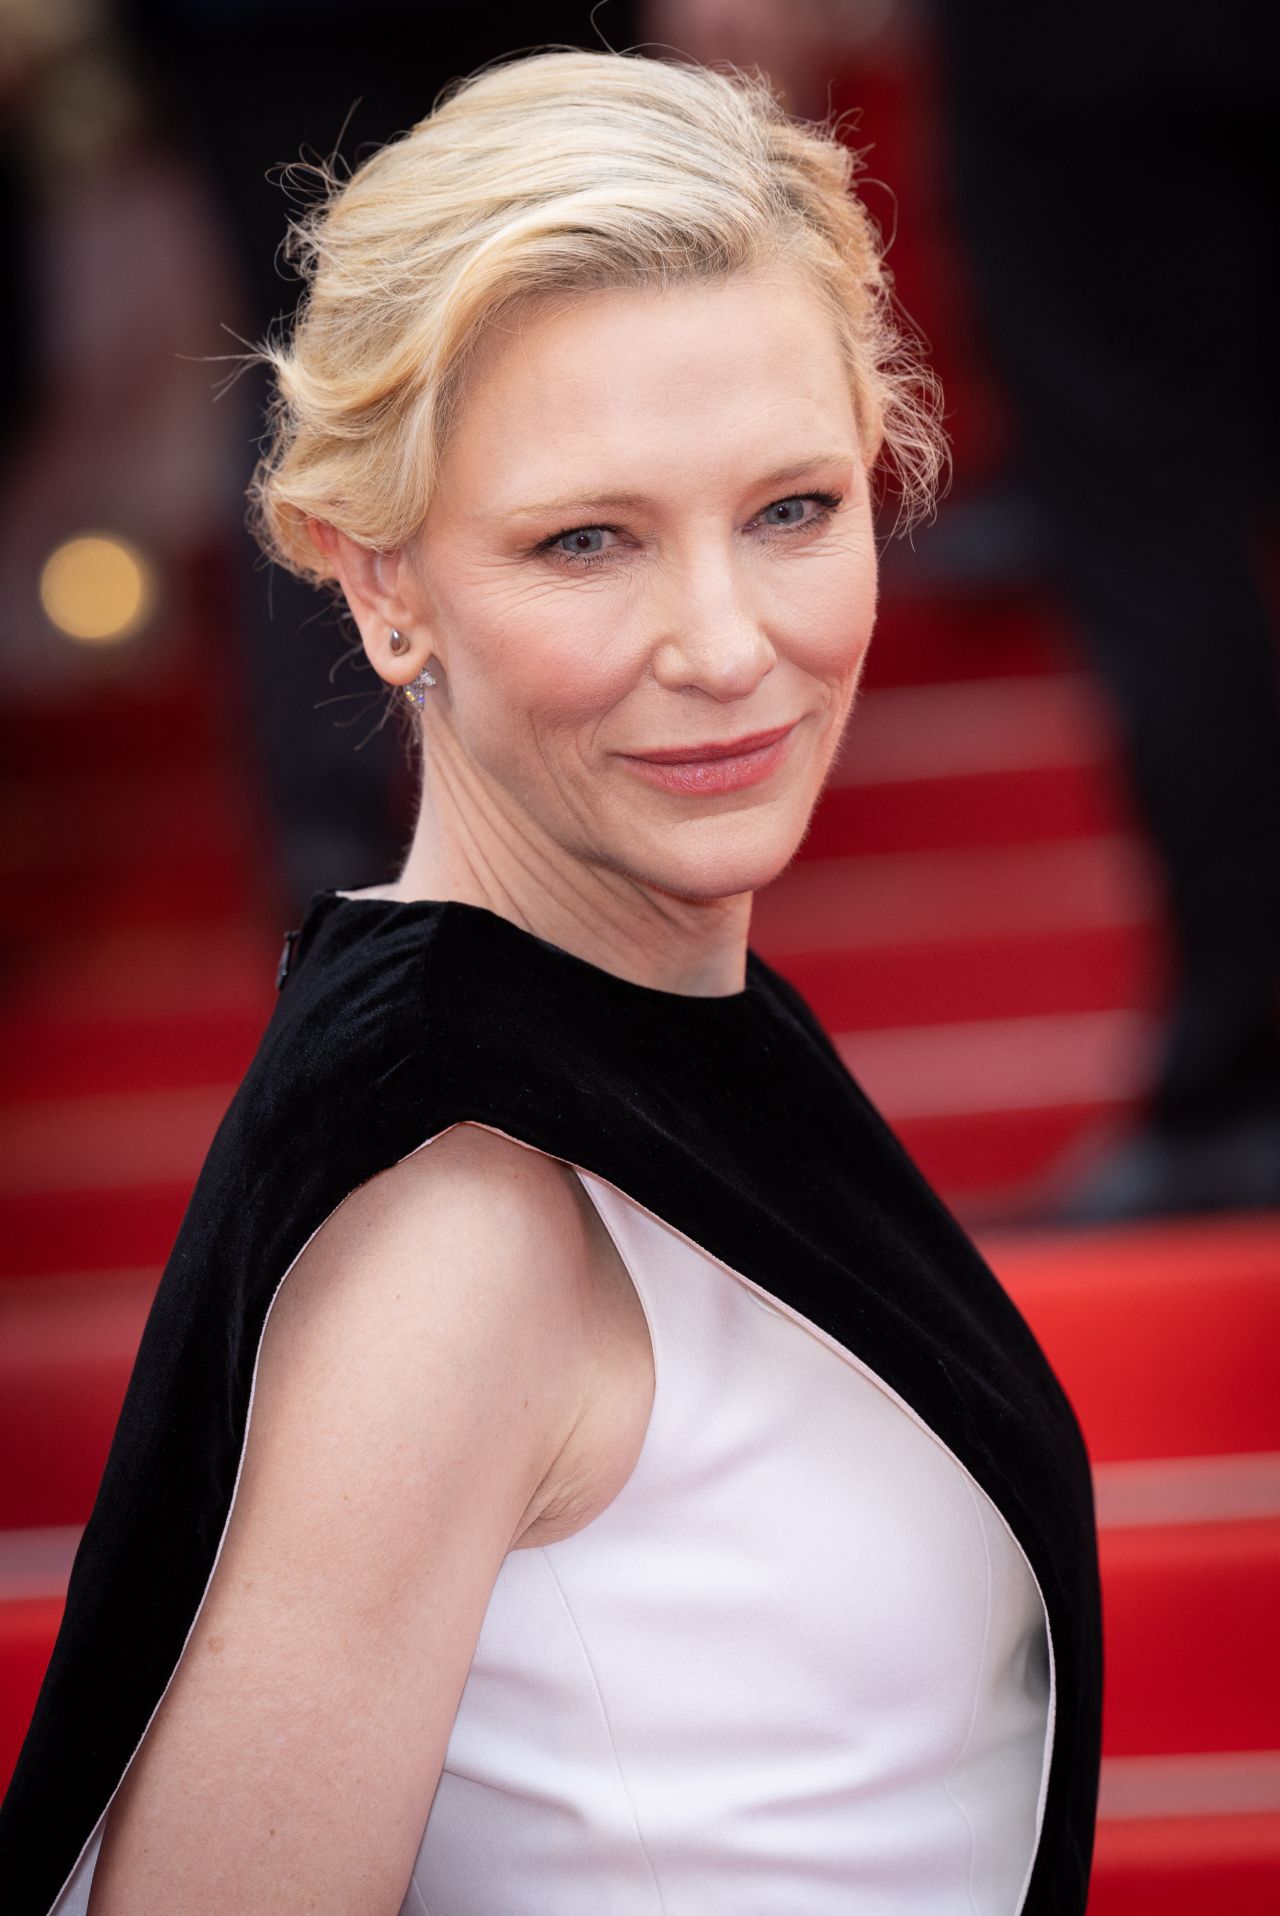 Cate Blanchett “The Zone of Interest” Red Carpet at Cannes Film